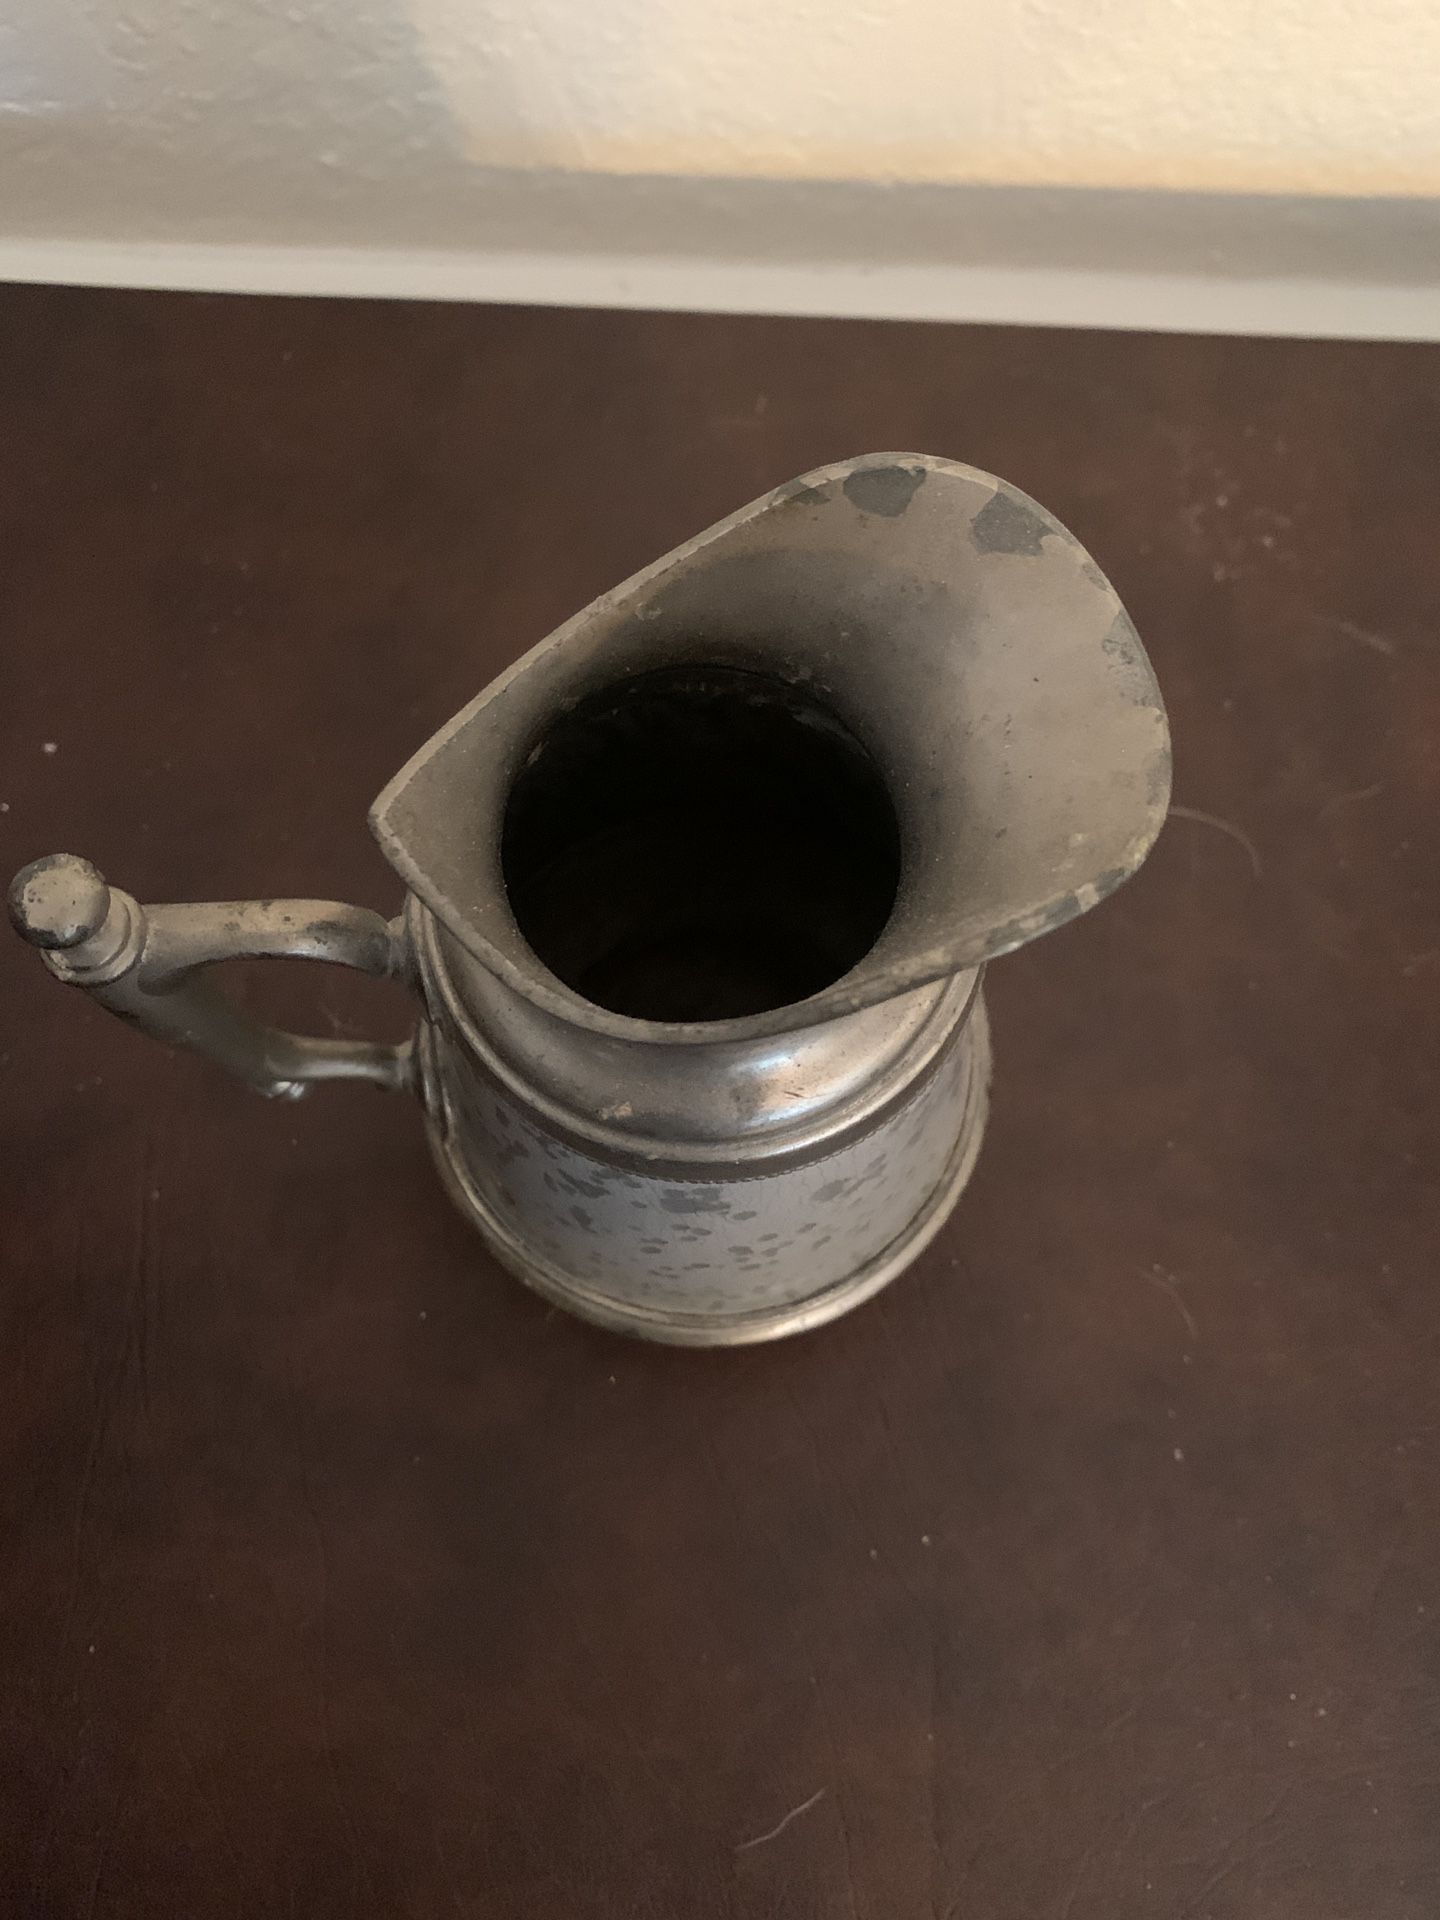 Enamelware Picture Has a bad spot as seen in first pic